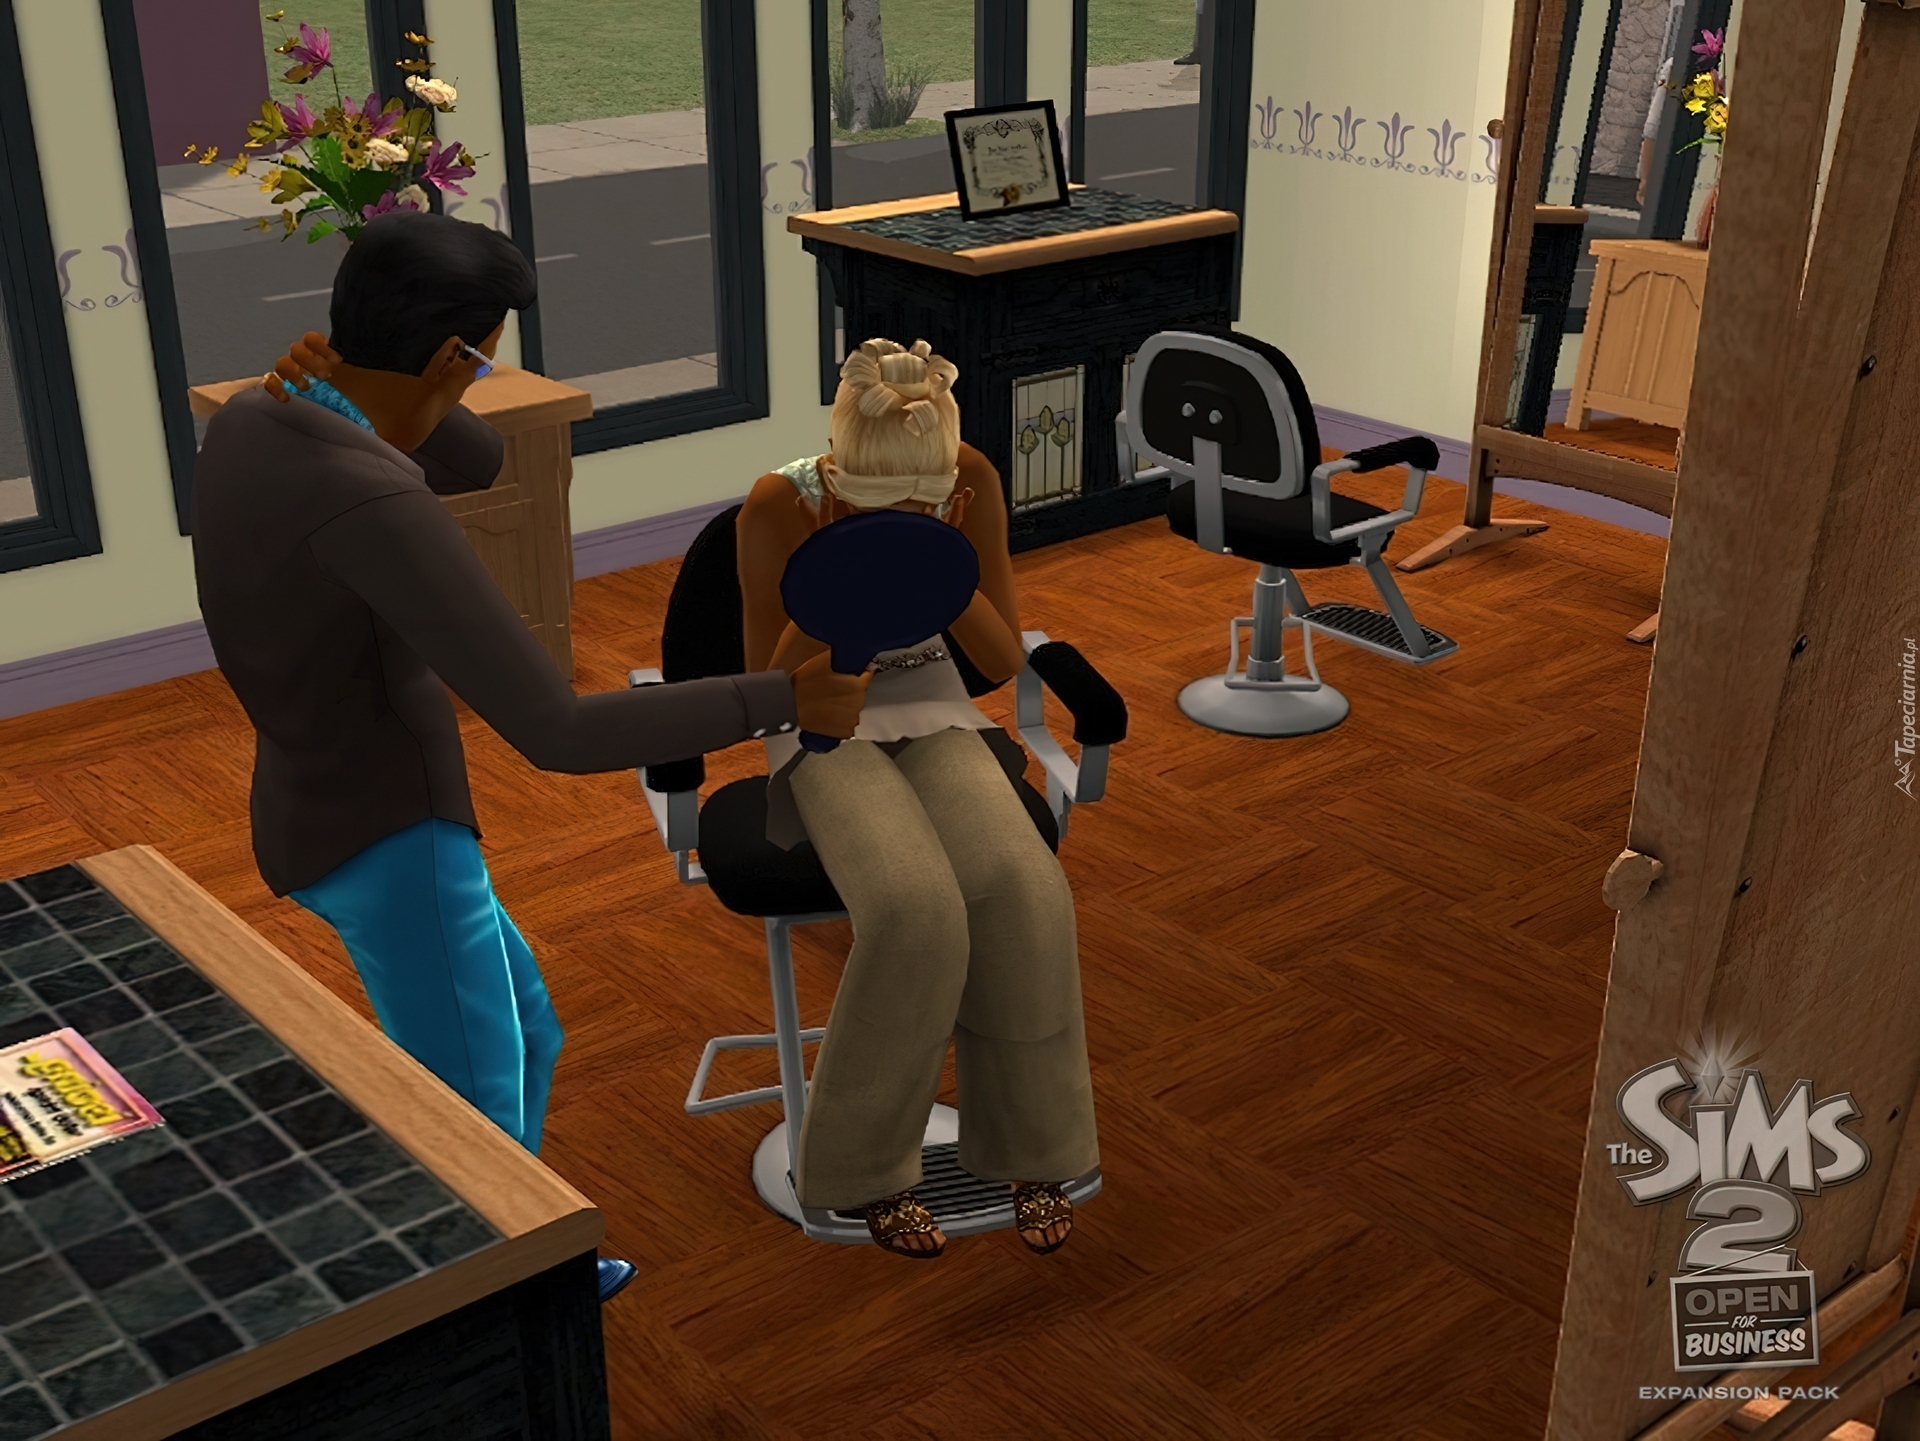 The Sims 2, Open Business